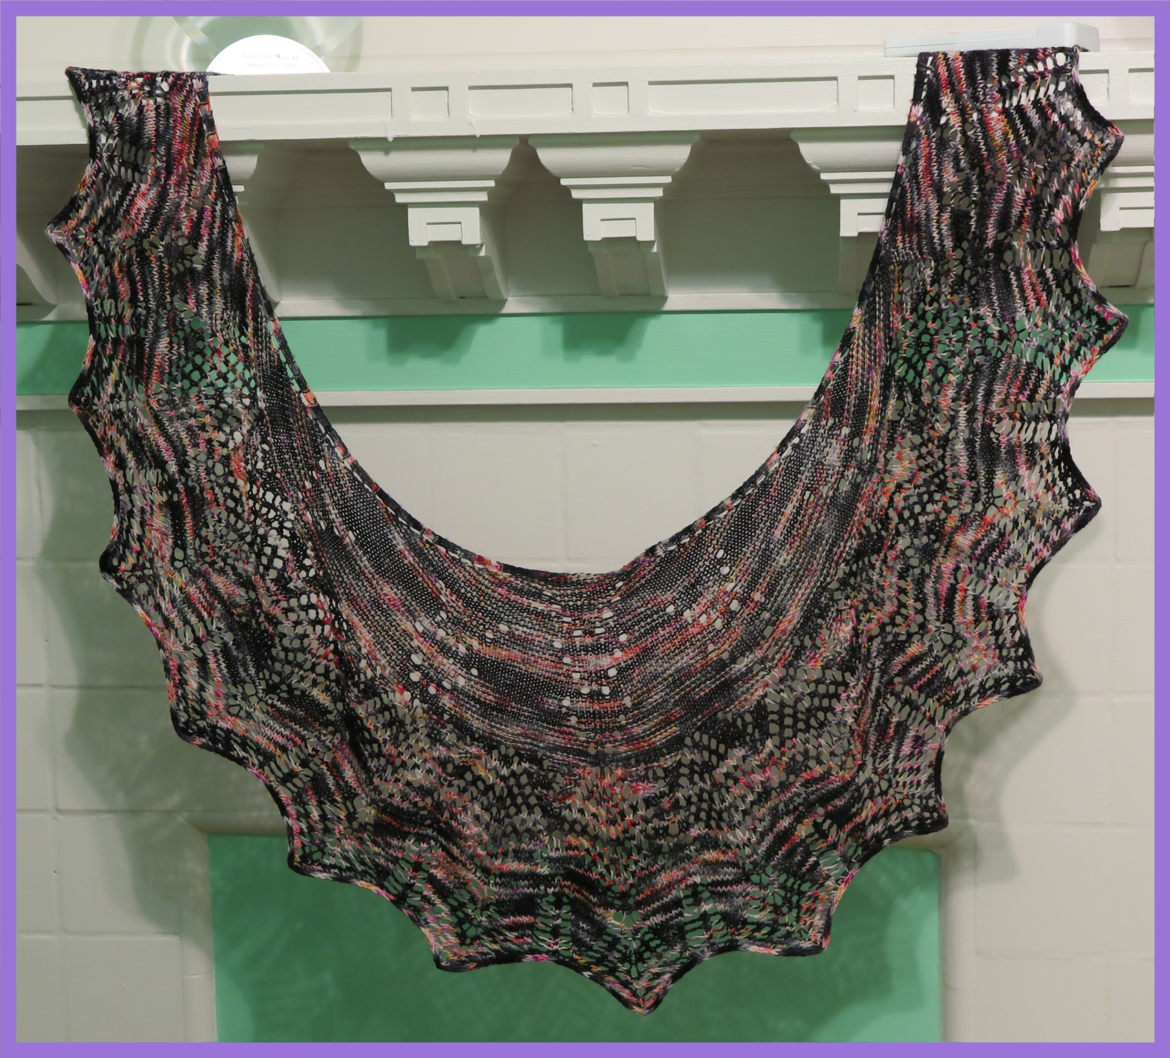 A lace shawl is hung from a mantle of a filled in fireplace painted in white and mint green. The yarn is black with splashes of pinks, oranges, white and grey and the lace pattern forms arrow heads and fletching.